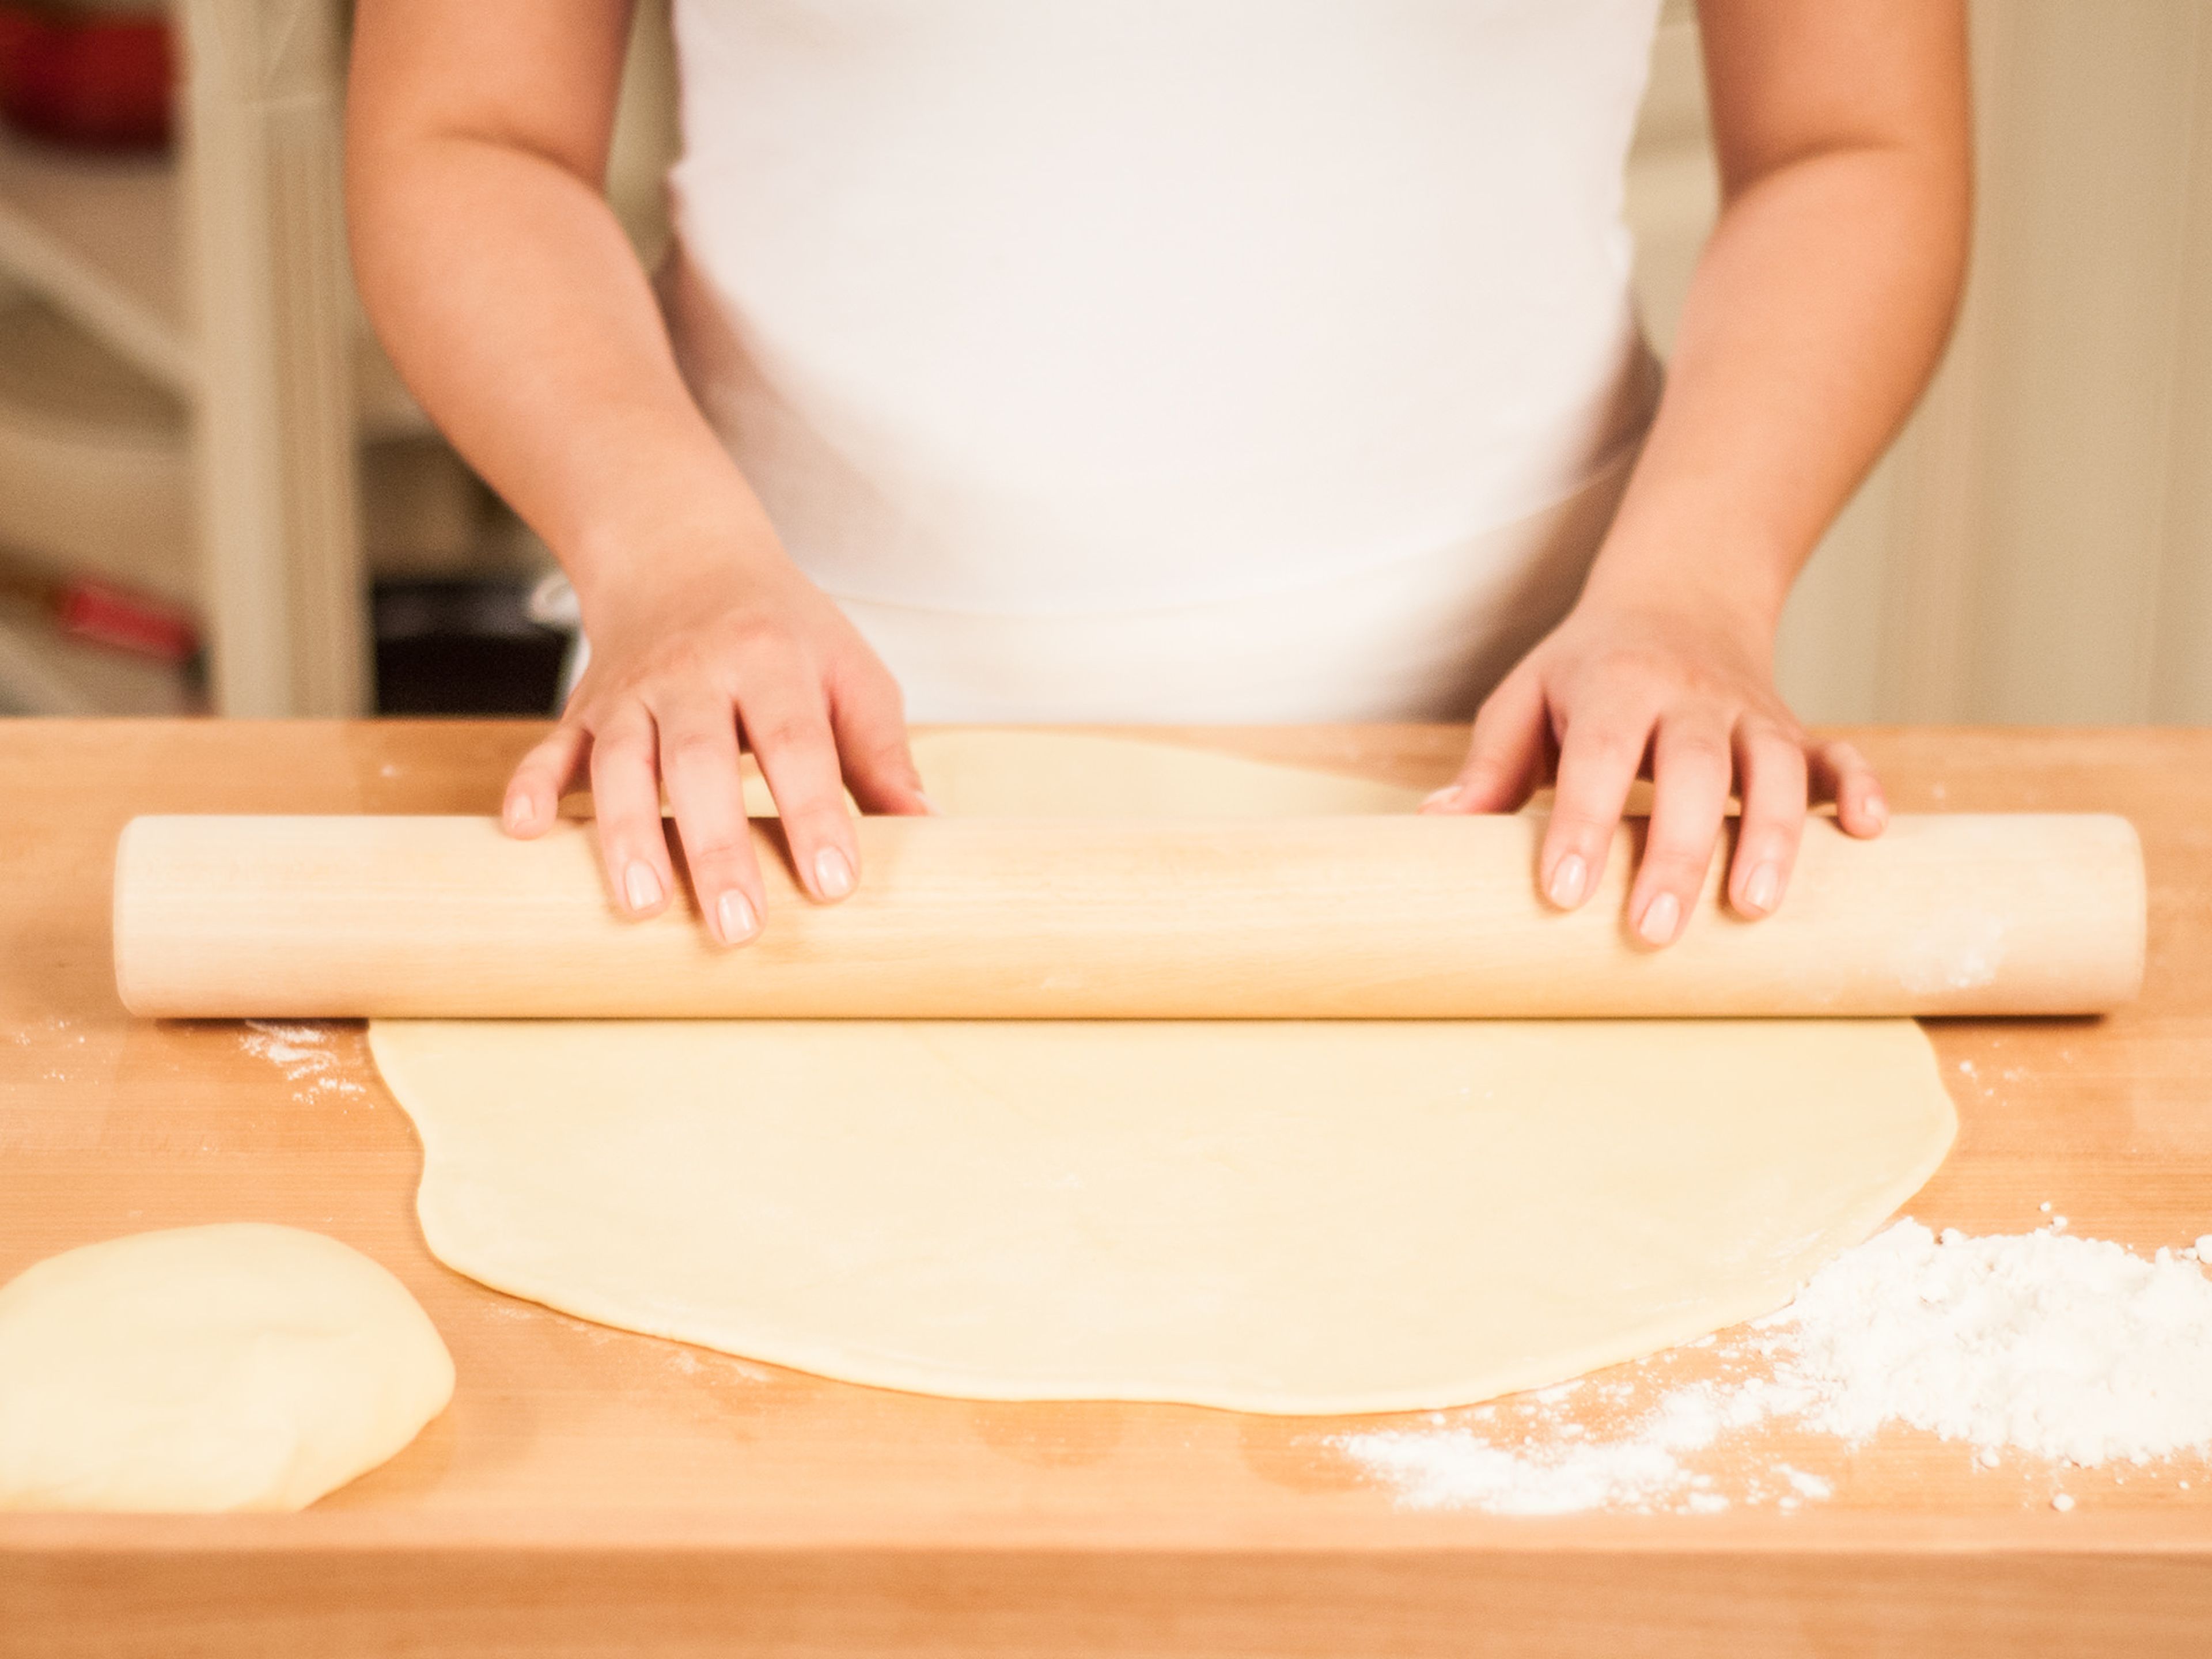 Now, on a lightly floured surface roll out two thirds of the dough into a large round to form the bottom of the pie. Roll out the remaining third into another round to form the top of the pie. Both rounds should be approx. 0.5cm thick.